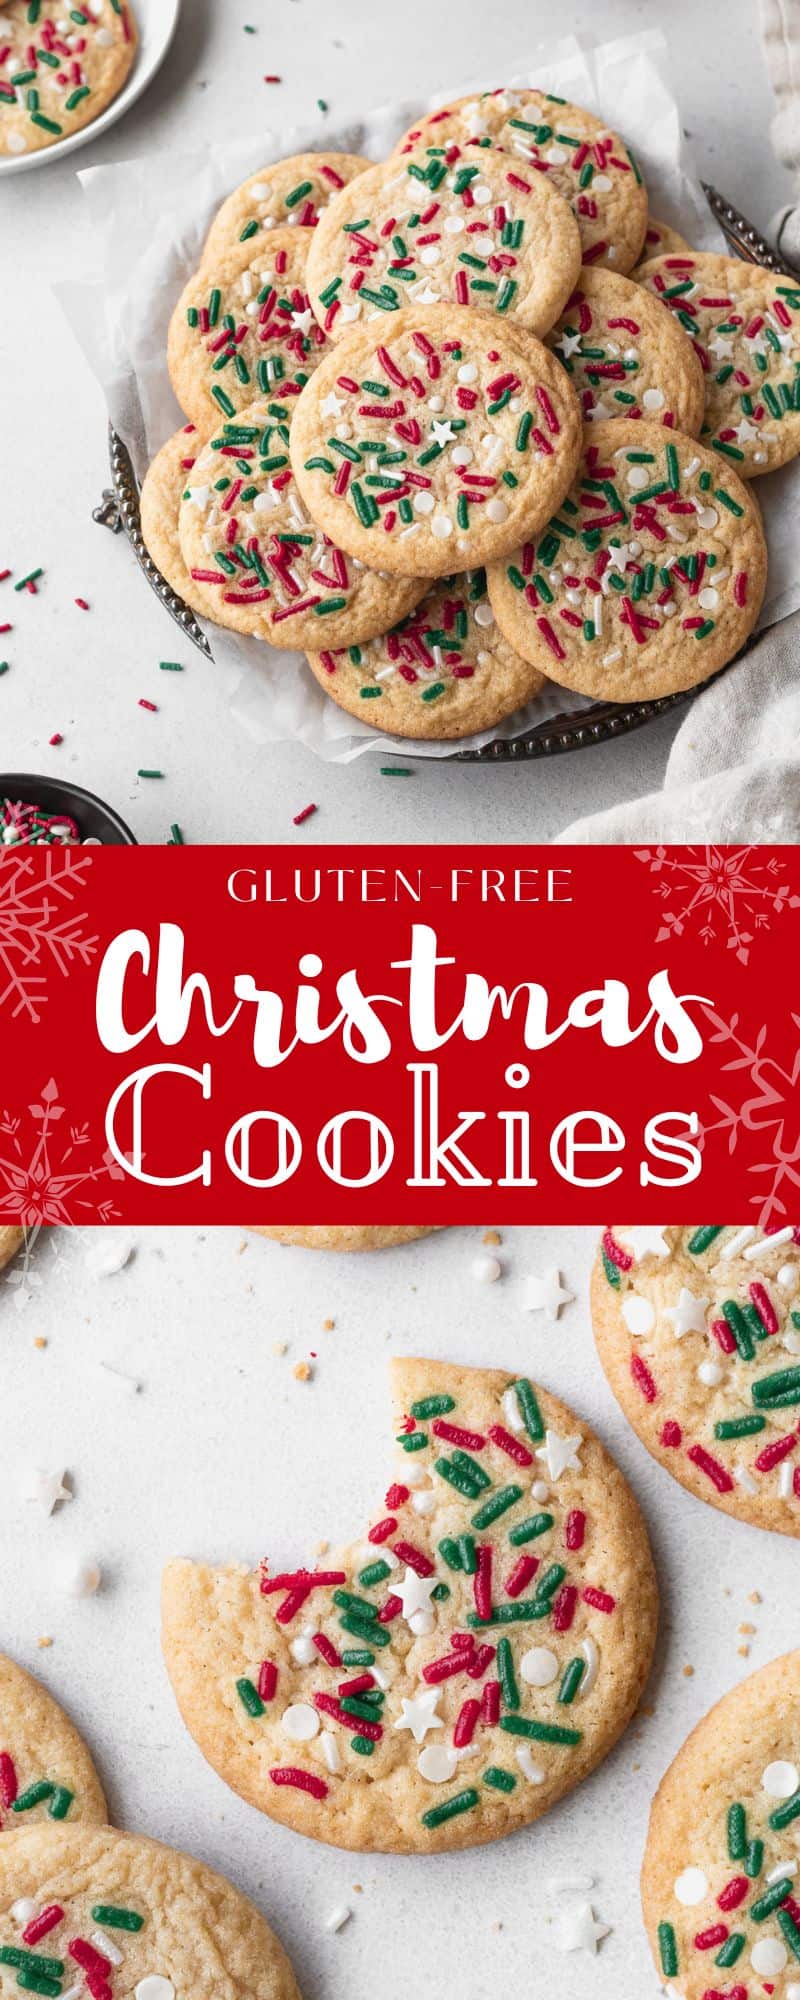 Gluten free Christmas cookies on a platter with sprinkles.